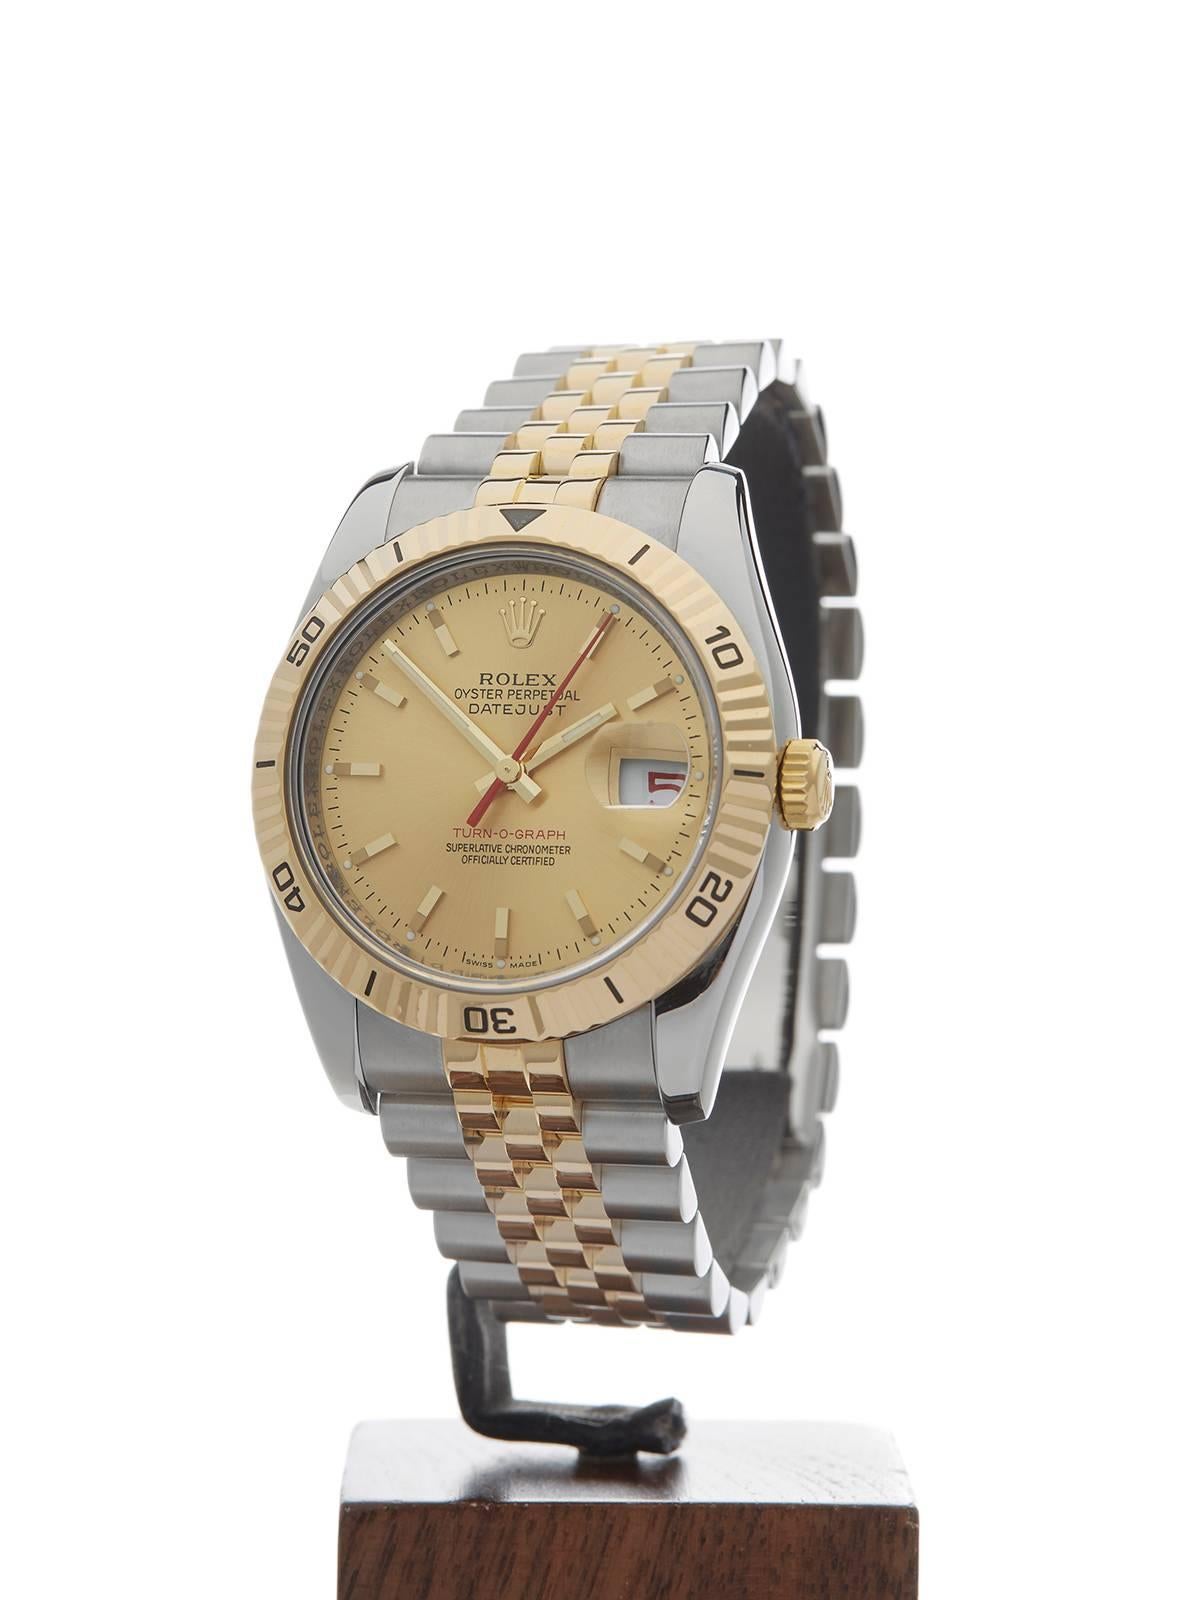 Ref: W3432
Model: 116263
Serial: F81****
Condition: 9 - Excellent condition
Age: 27th September 2005
Case Diameter: 36 mm
Case Size: 36mm
Box and Papers: Box, Manuals and Guarantee
Movement: Automatic
Case: Stainless Steel/18k Yellow Gold
Dial: